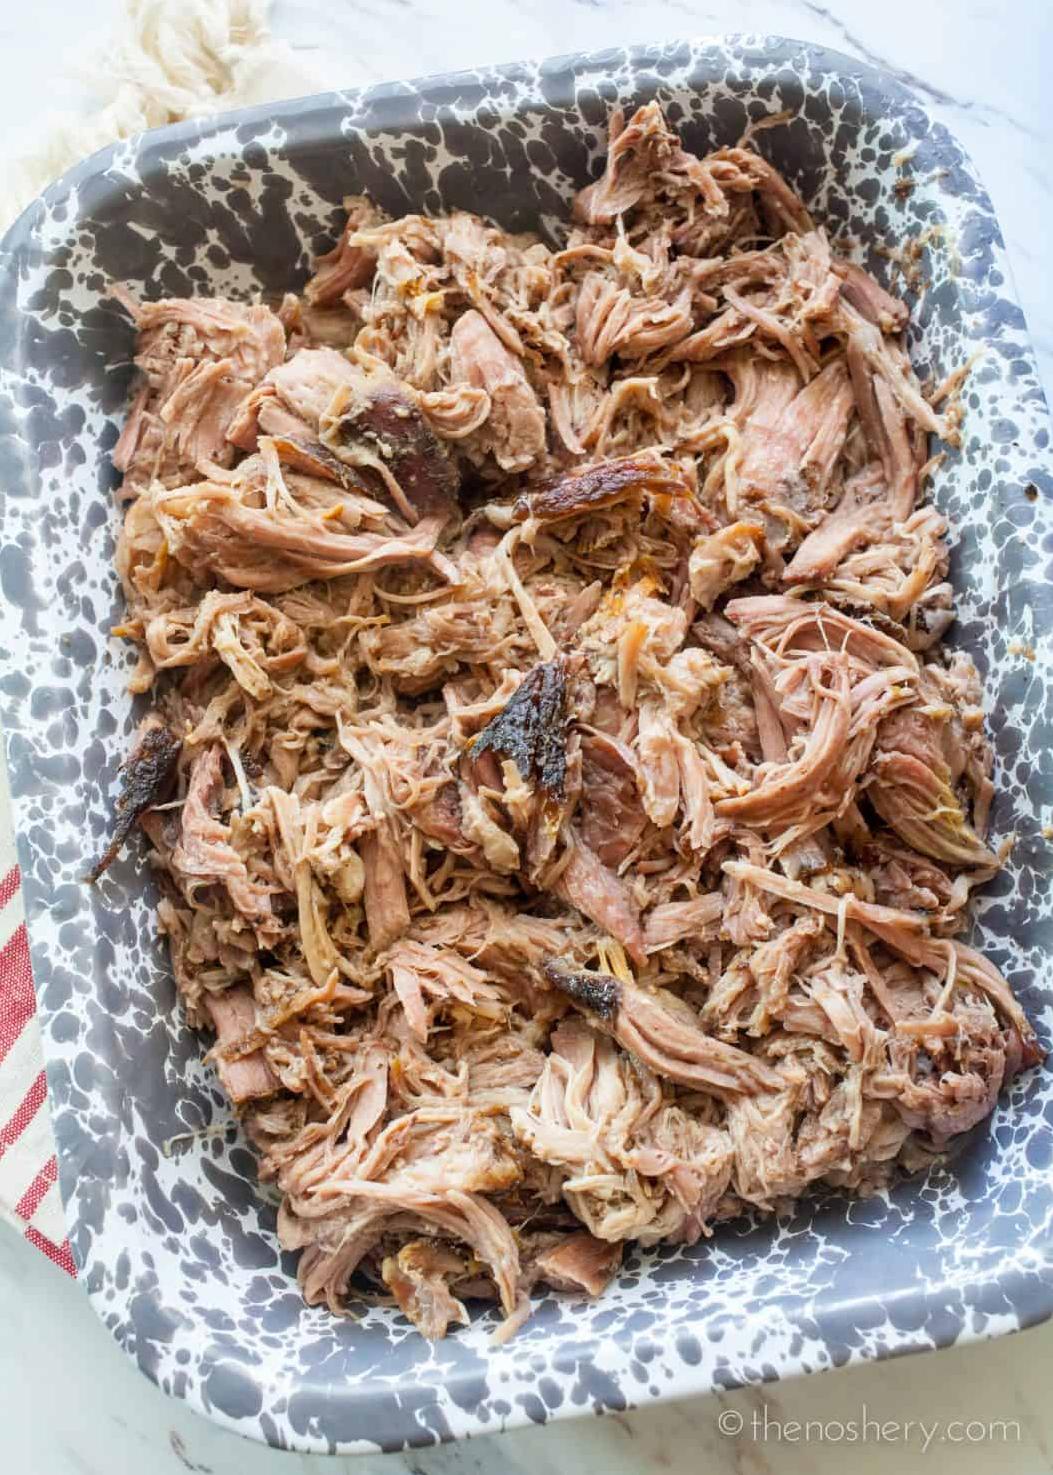  It's time to spice up your meals. Try this Skinny Slow Cooker Pernil!